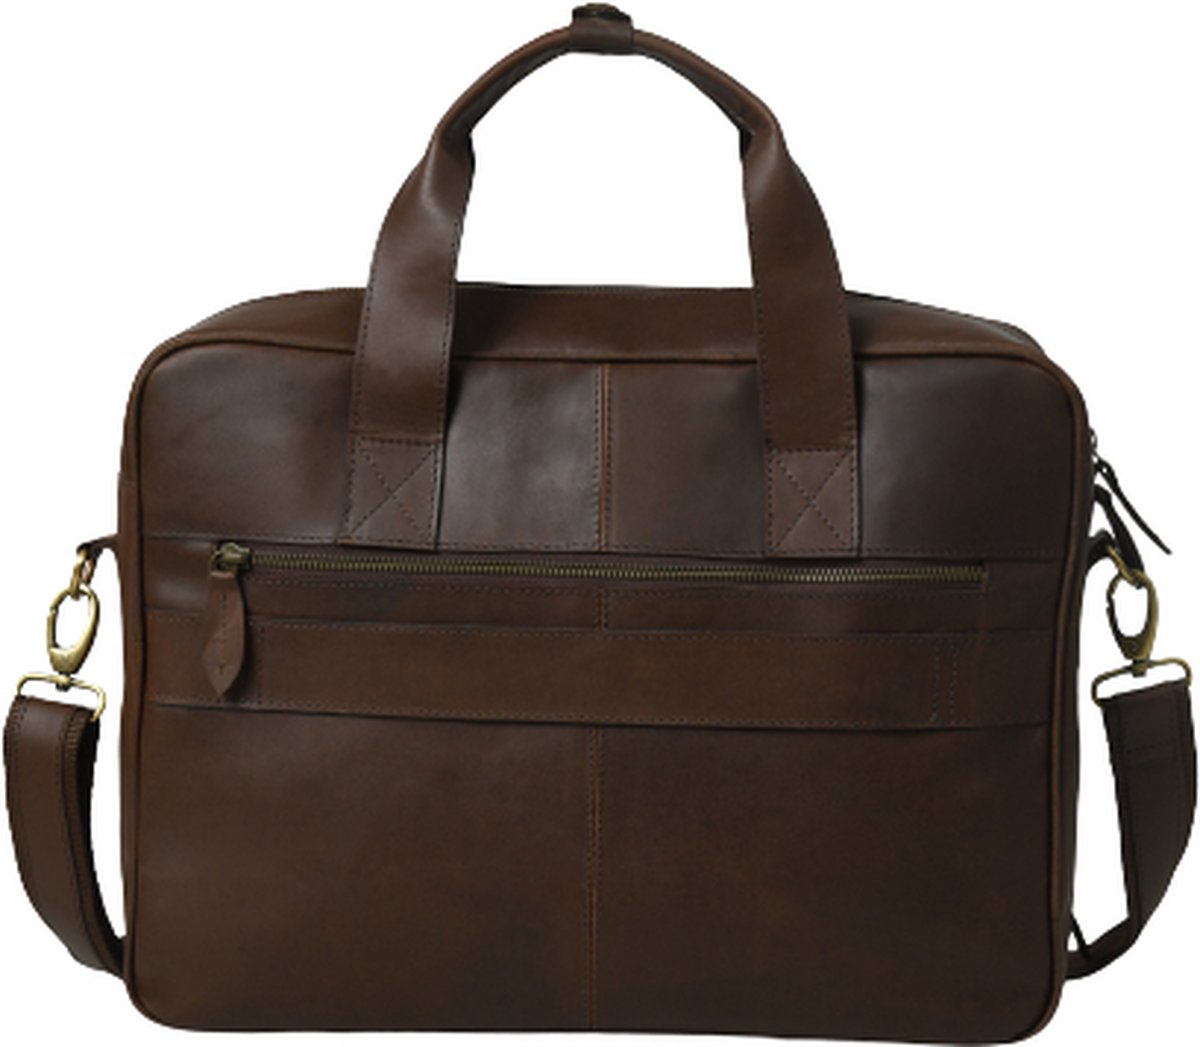 Leather Business Laptop Bag